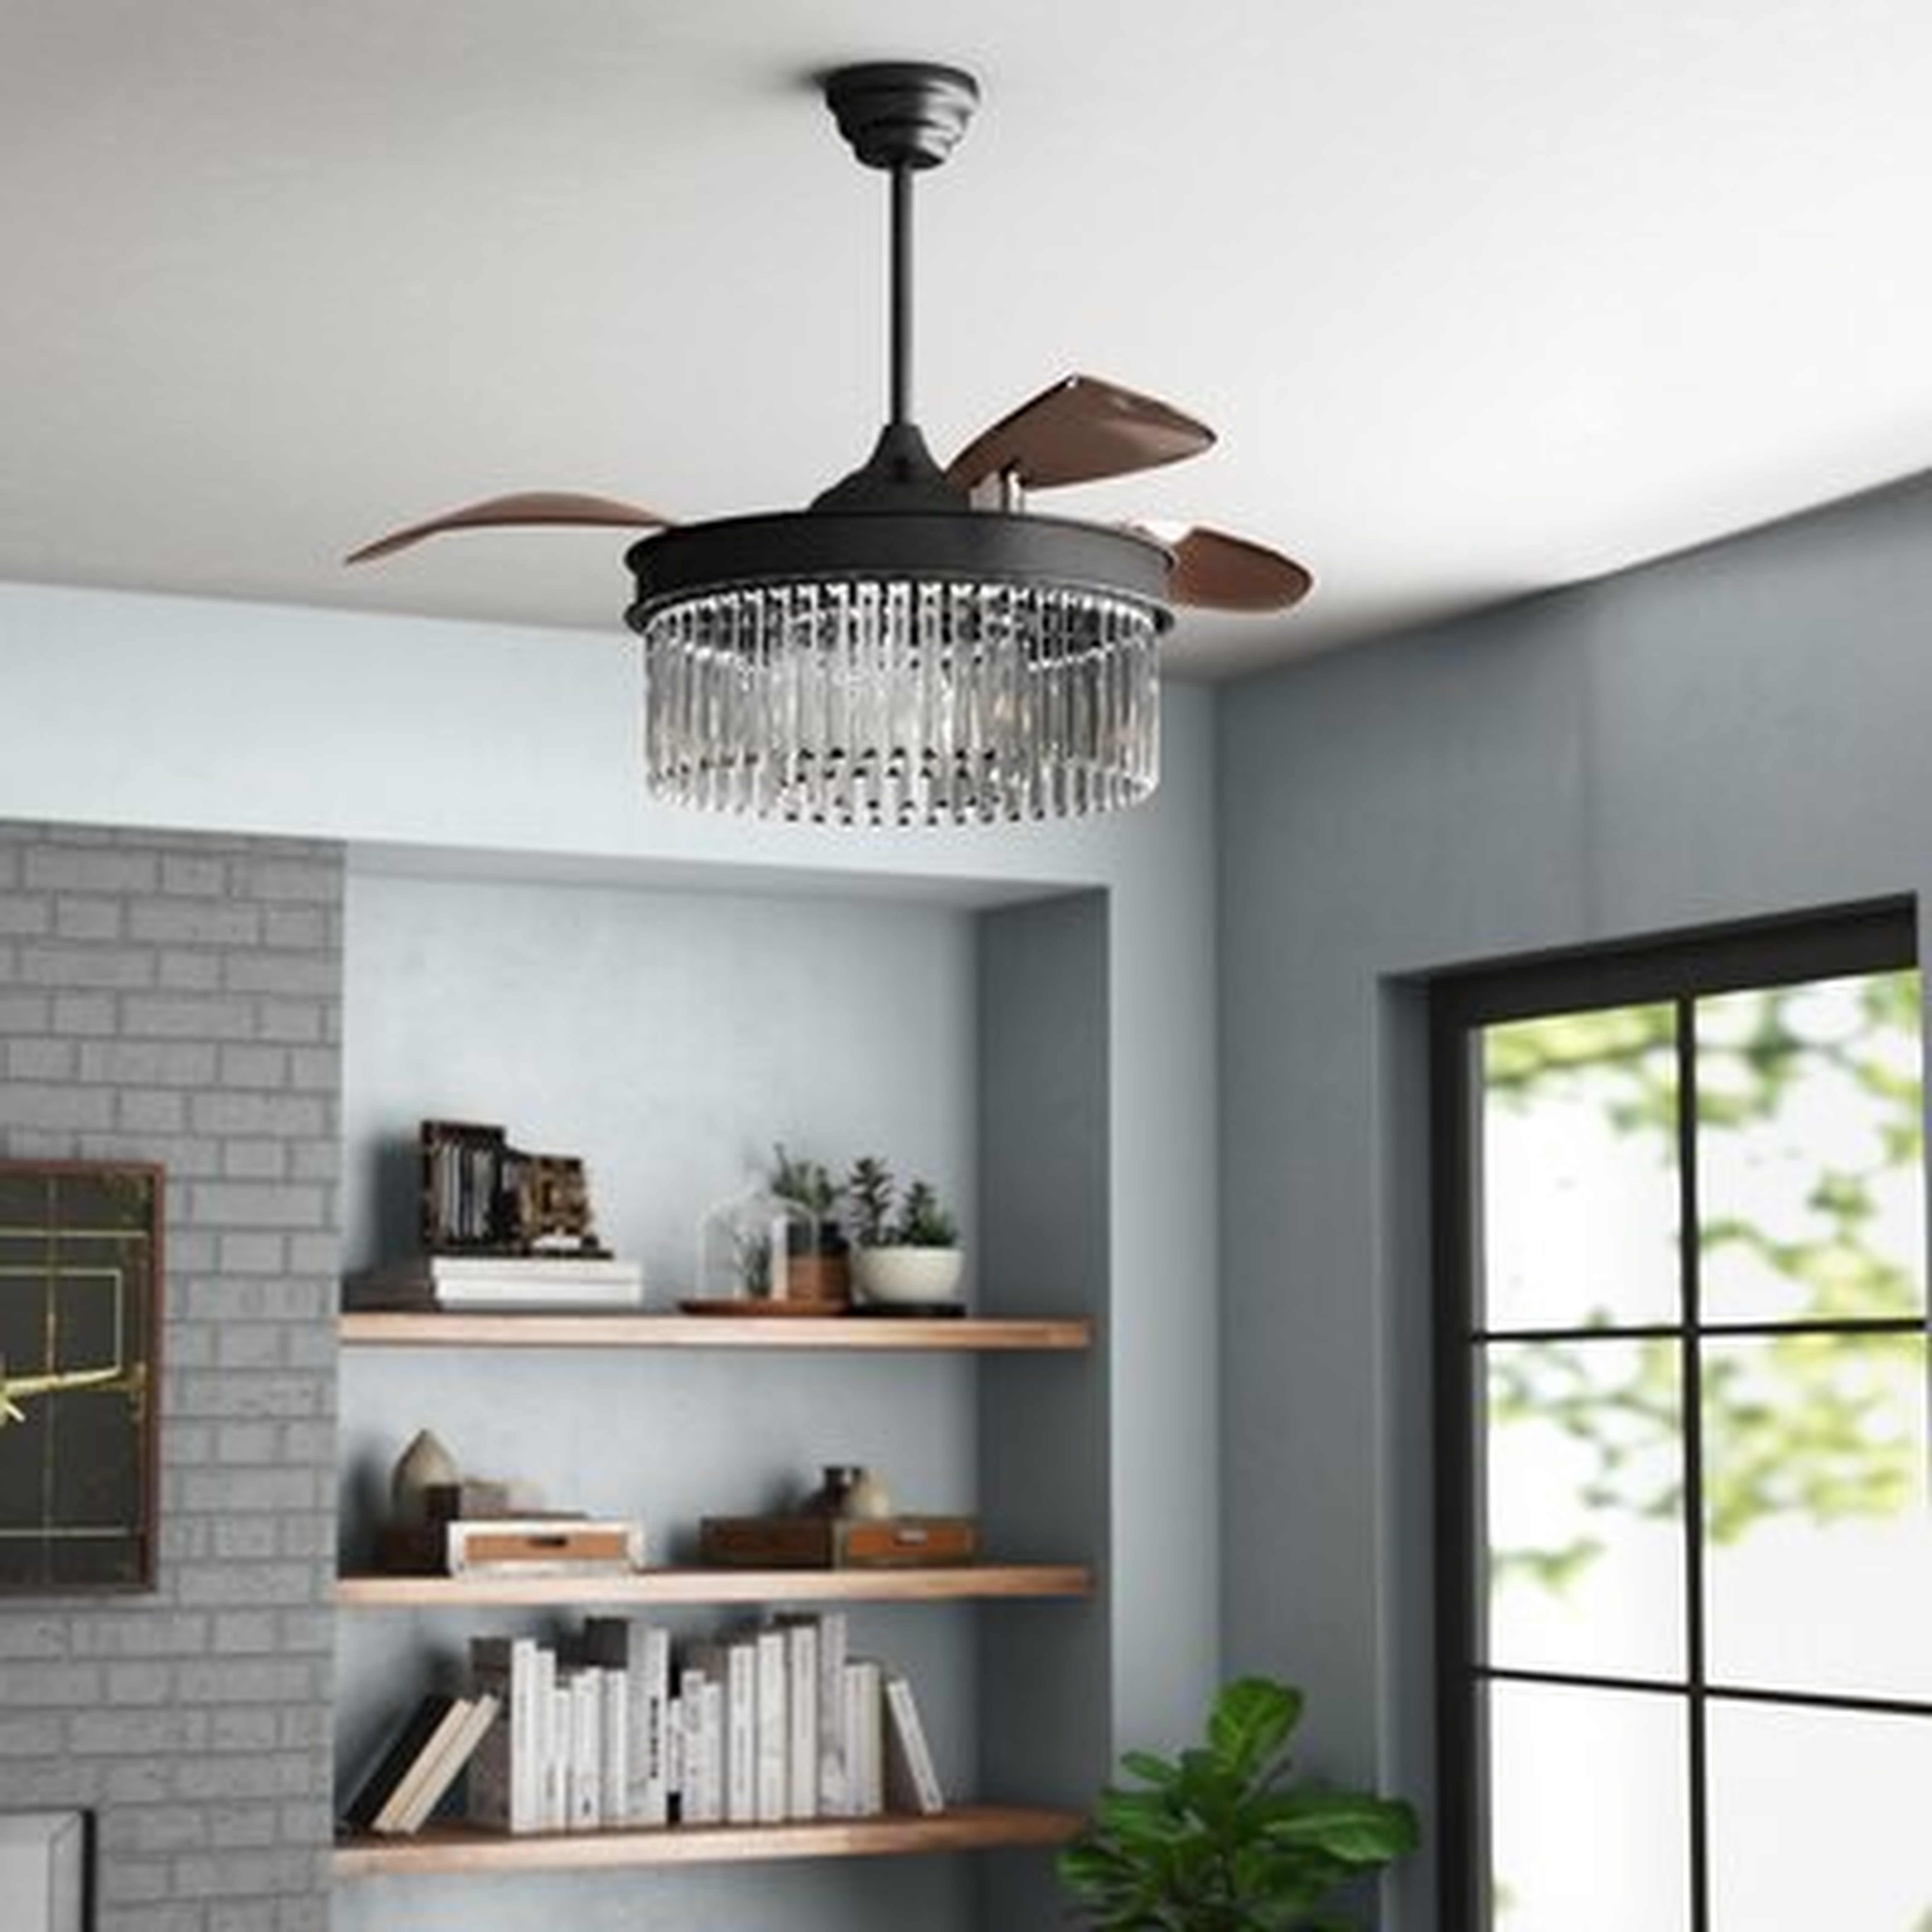 42" Schulze 3 - Blade Retractable Blades Ceiling Fan with Remote Control and Light Kit Included - Wayfair